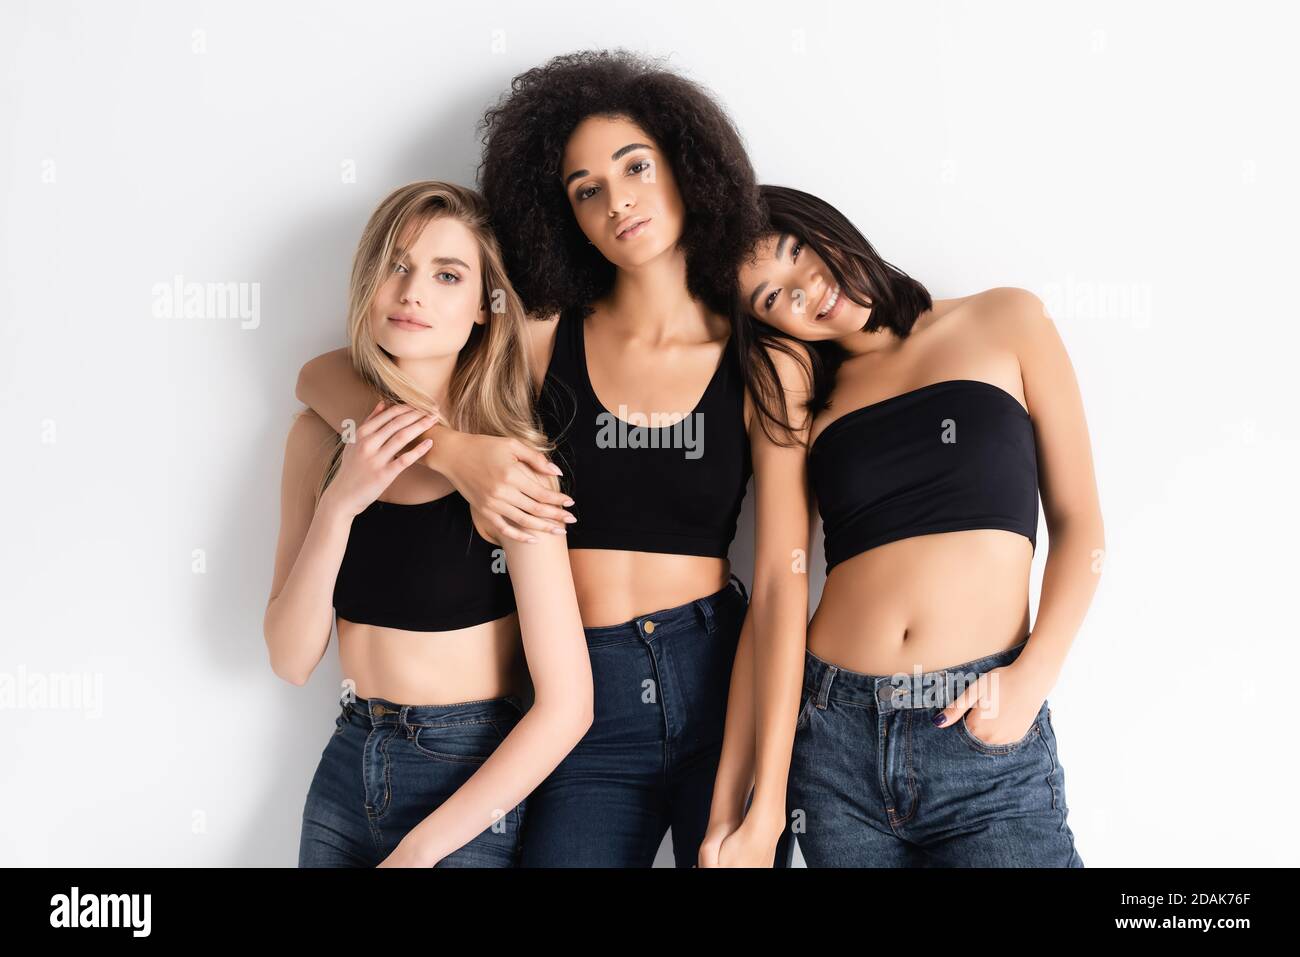 young interracial women in denim jeans and tops posing on white